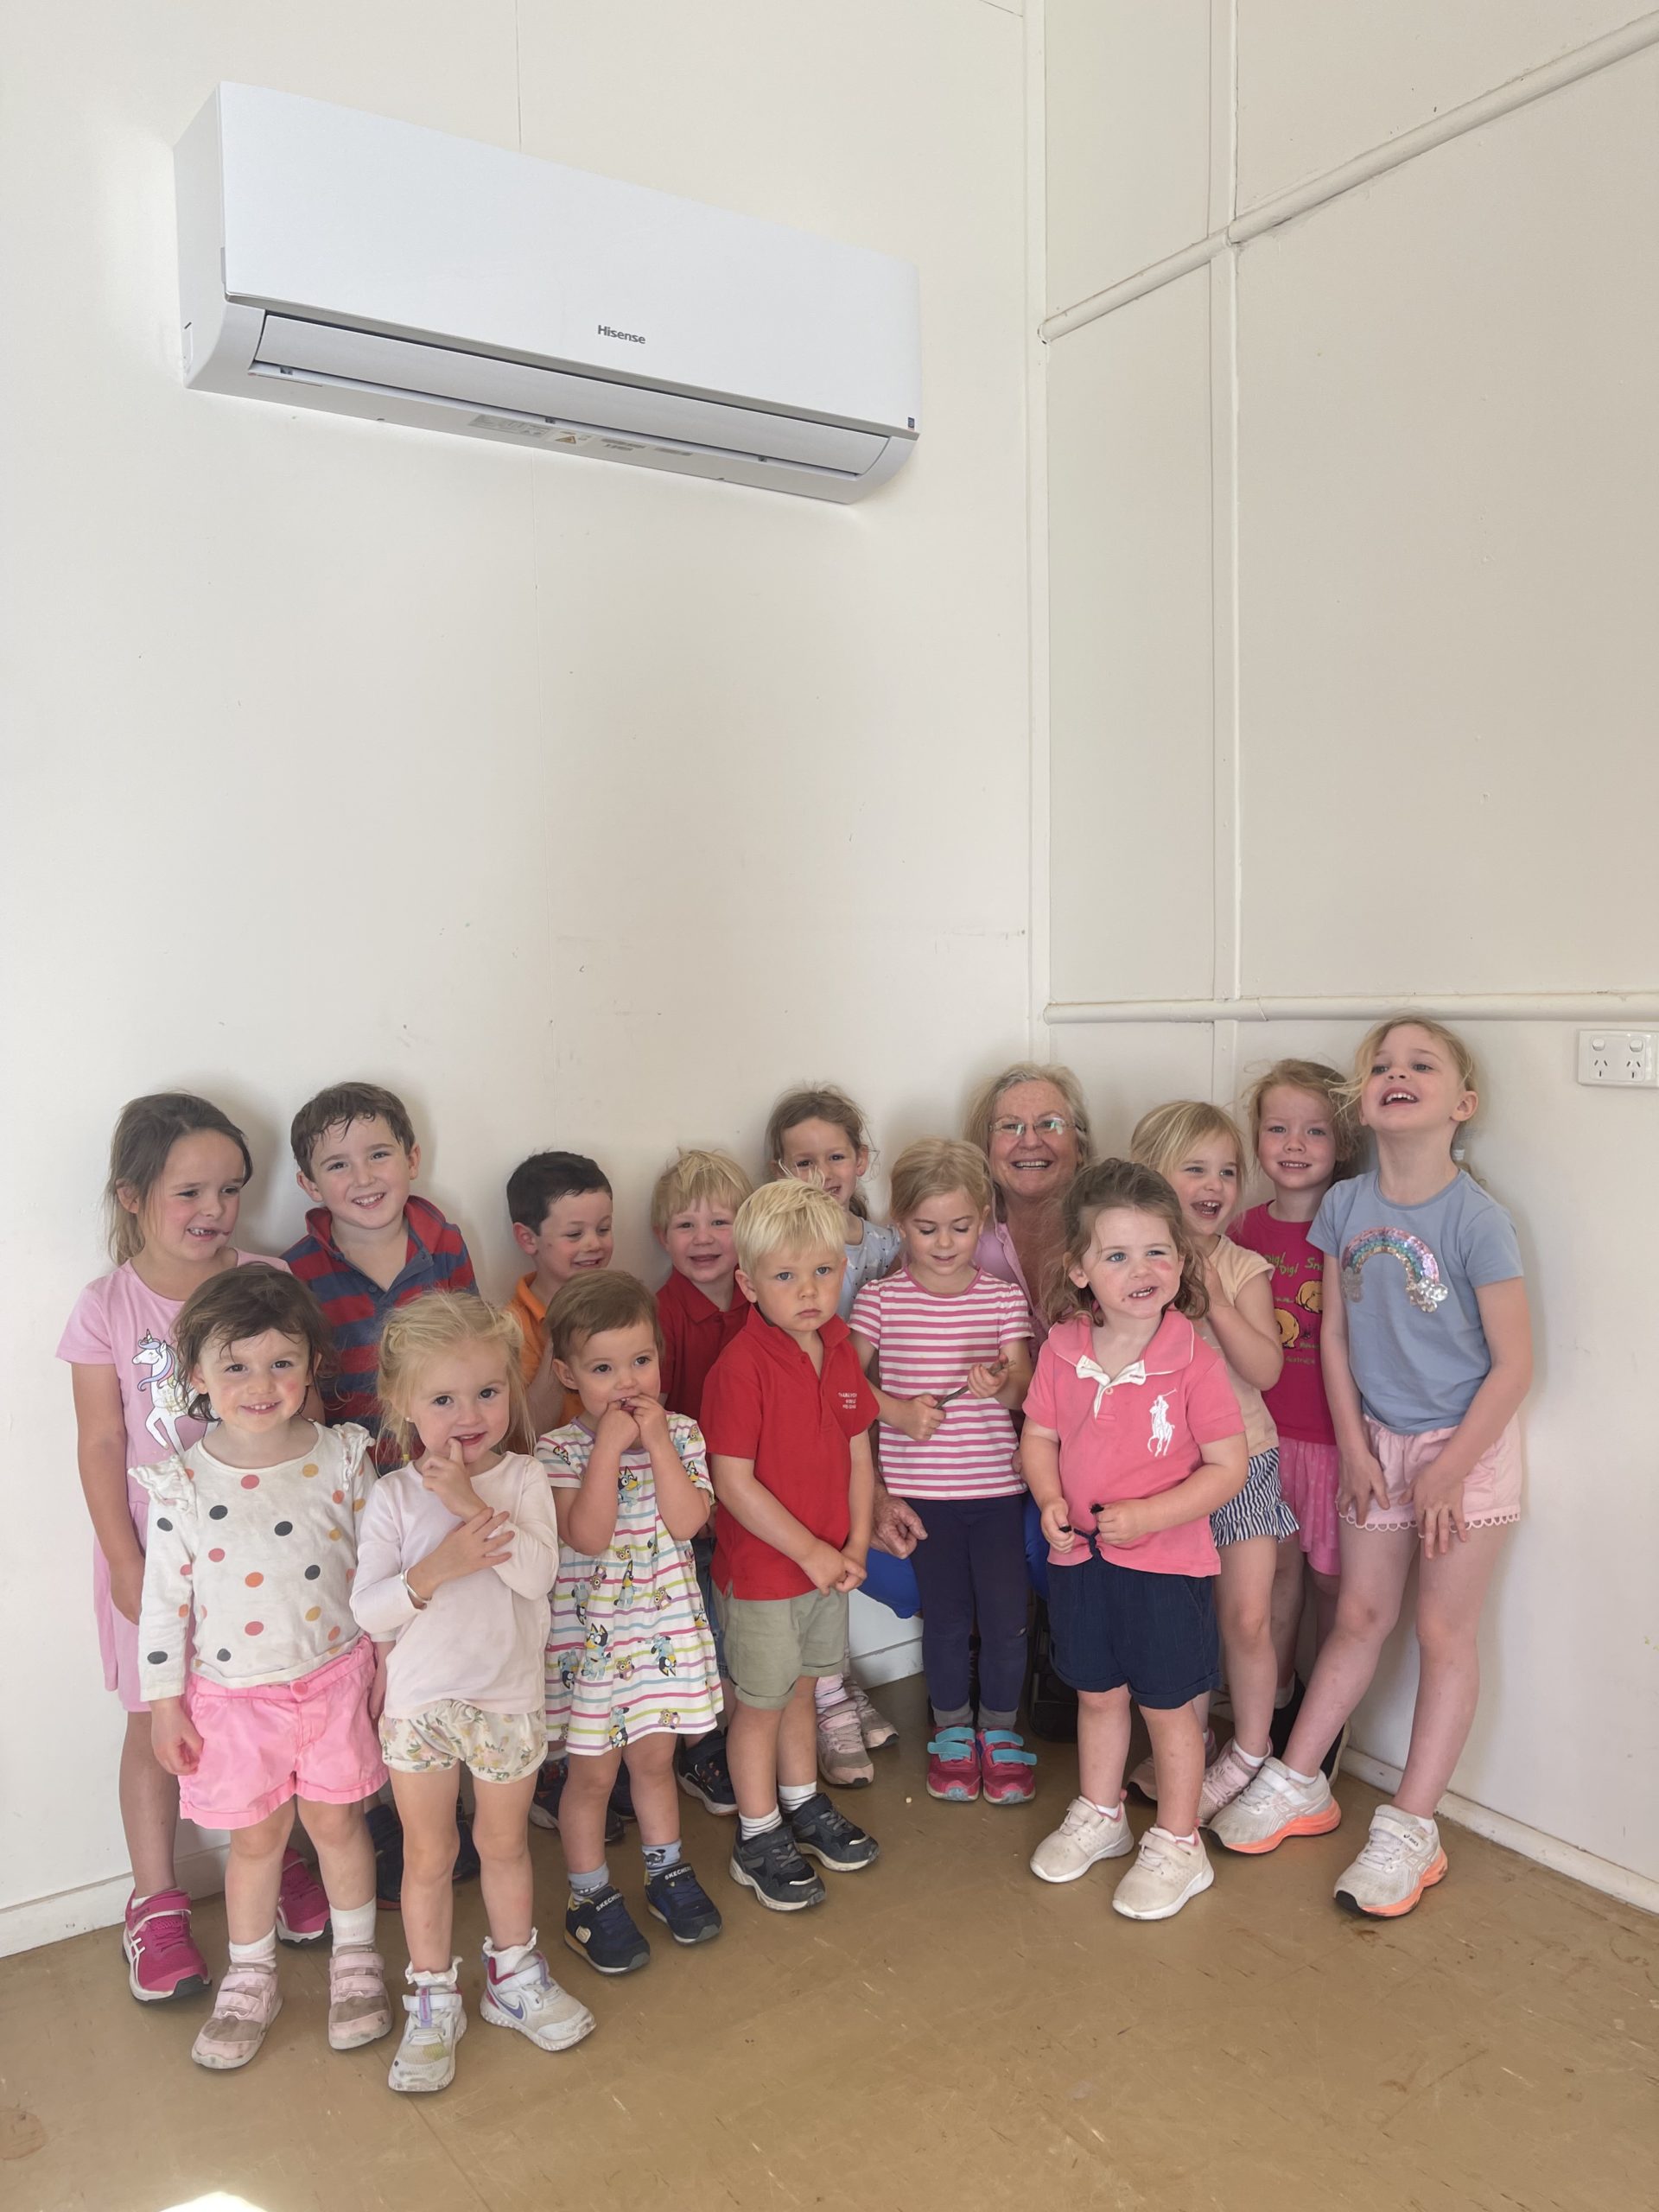 North Star Memorial Hall Tharawonga long day care kids enjoy the air-conditioning funded by the Inland Rail Community Sponsorships and Donations program